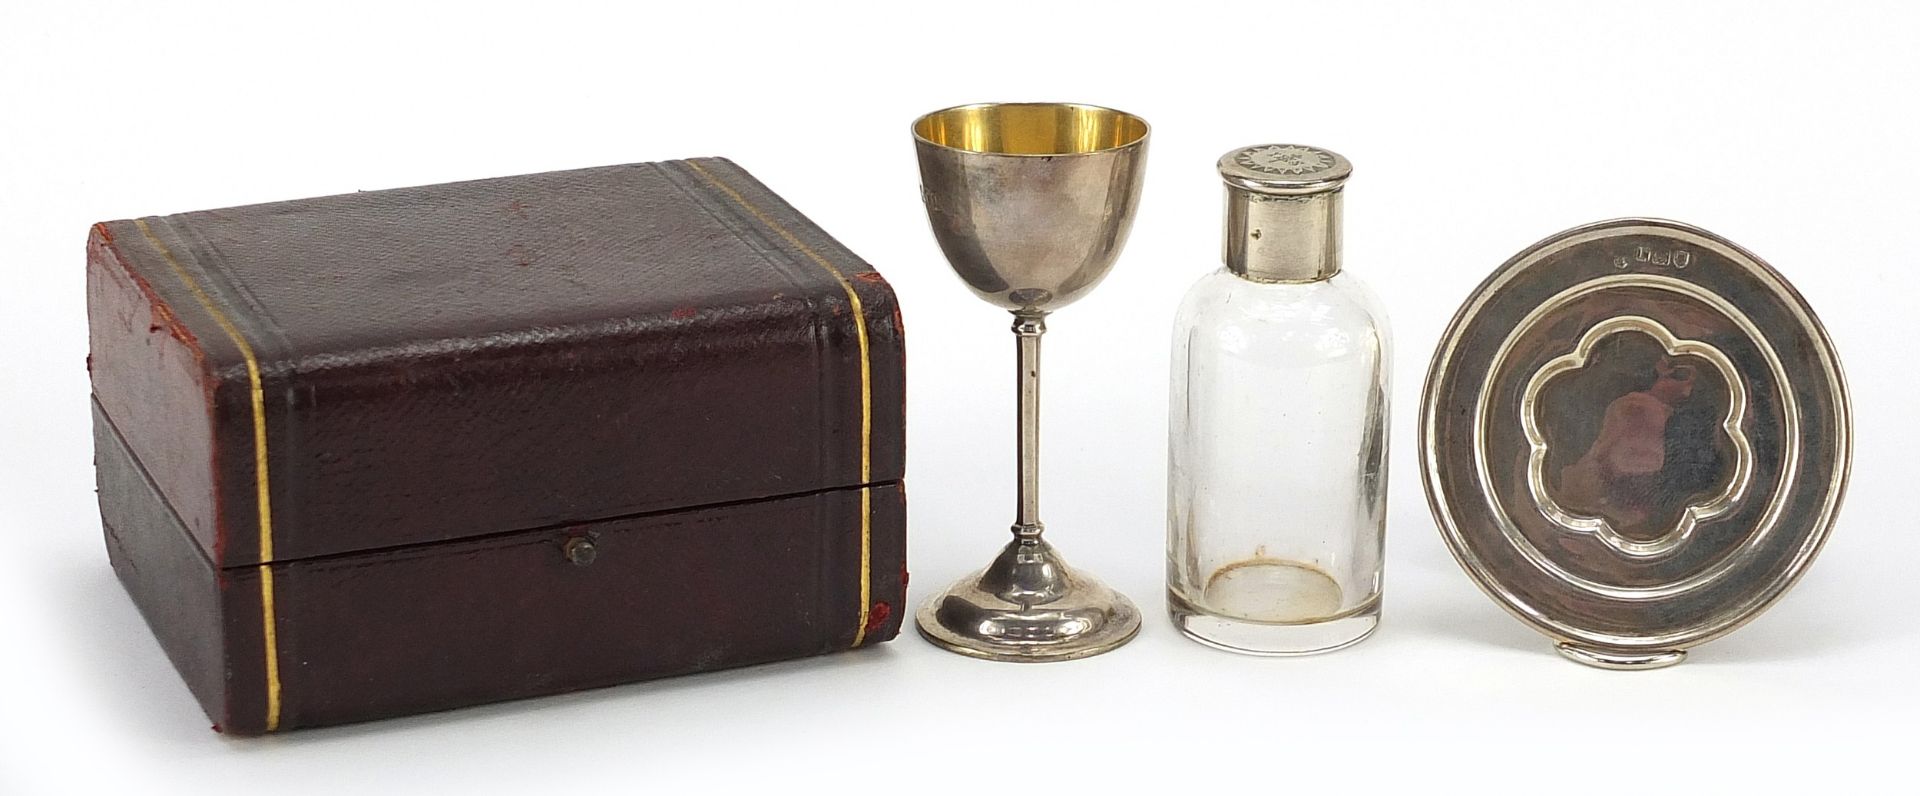 Josiah Williams & Co, George V silver travelling holy communion set, London 1910, the largest 8.